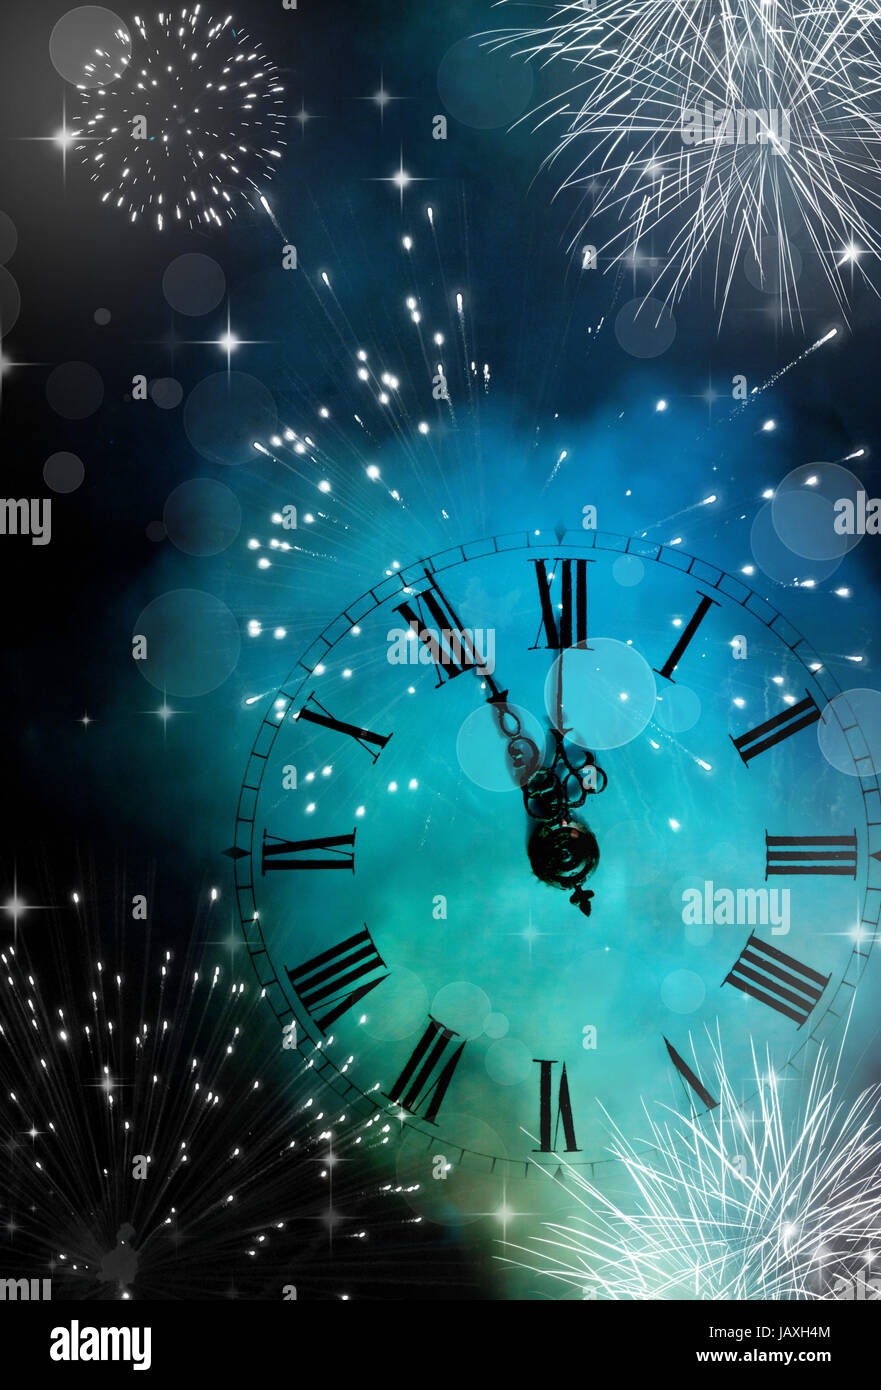 Old clock against fireworks and holiday lights Stock Photo